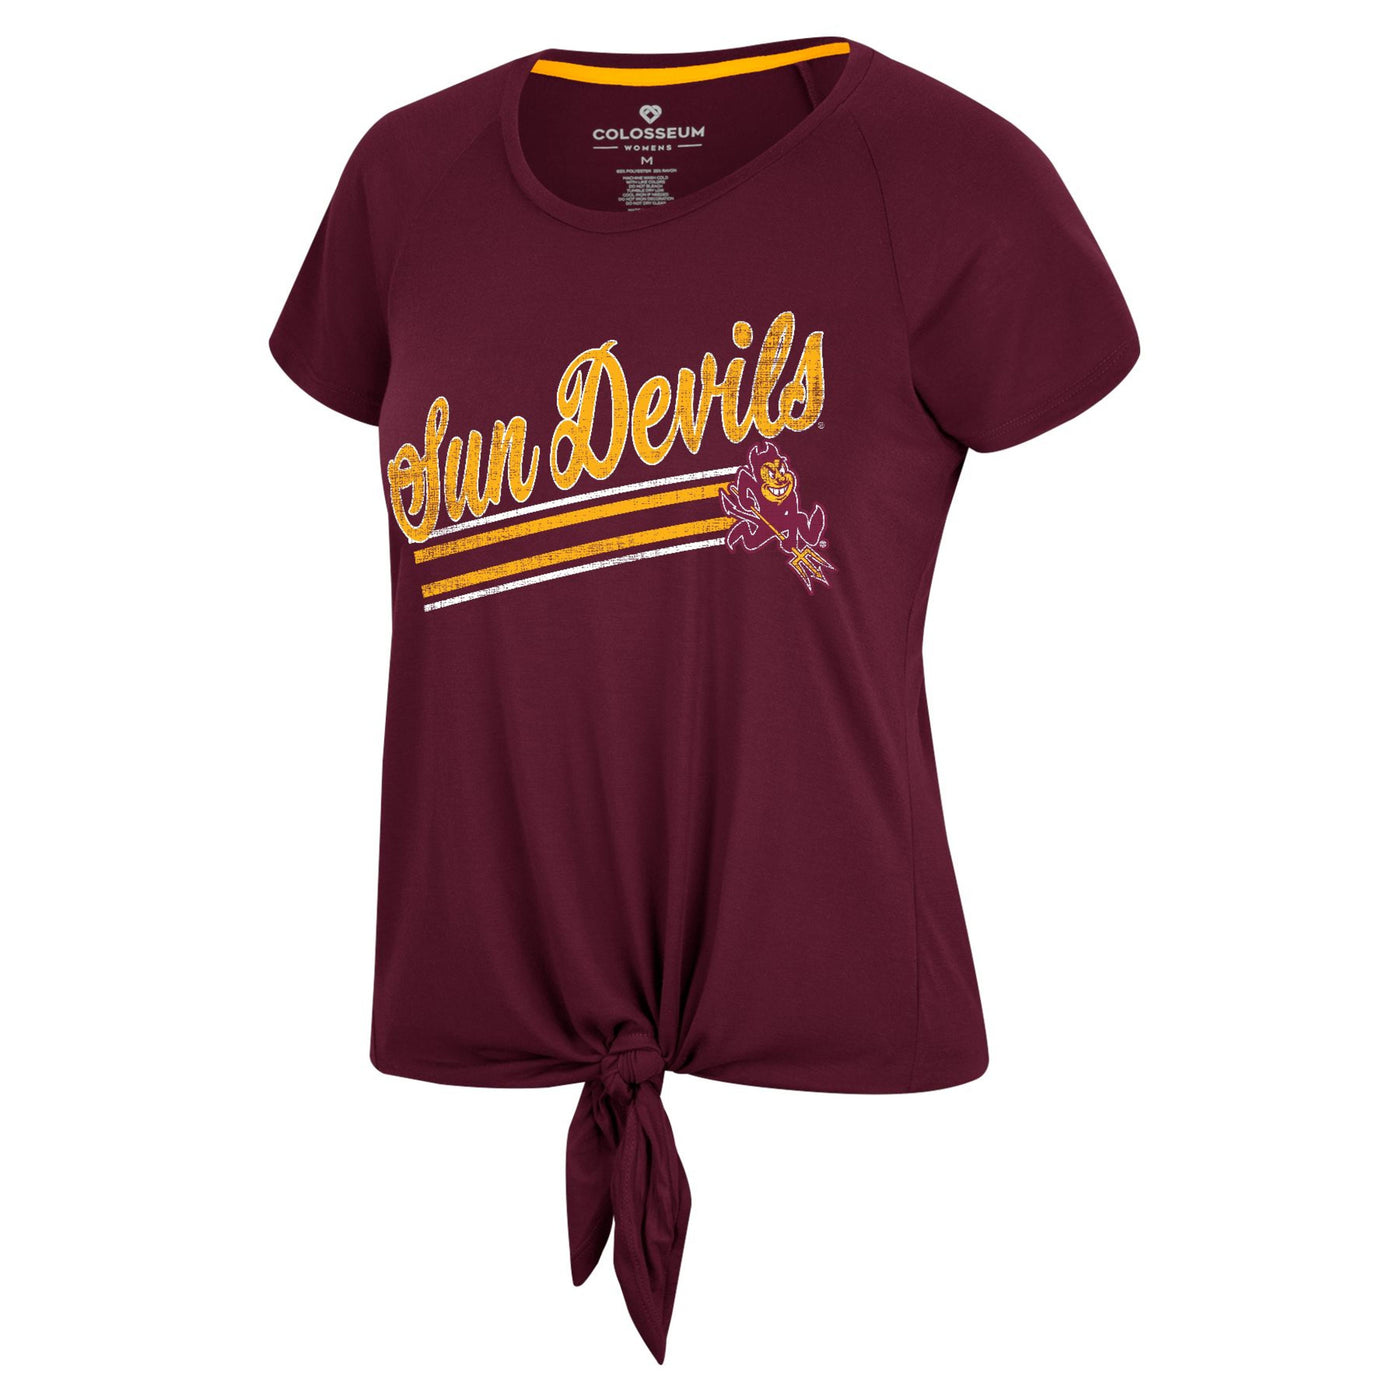 ASU Maroon womens tee with a tie at the bottom.  the text 